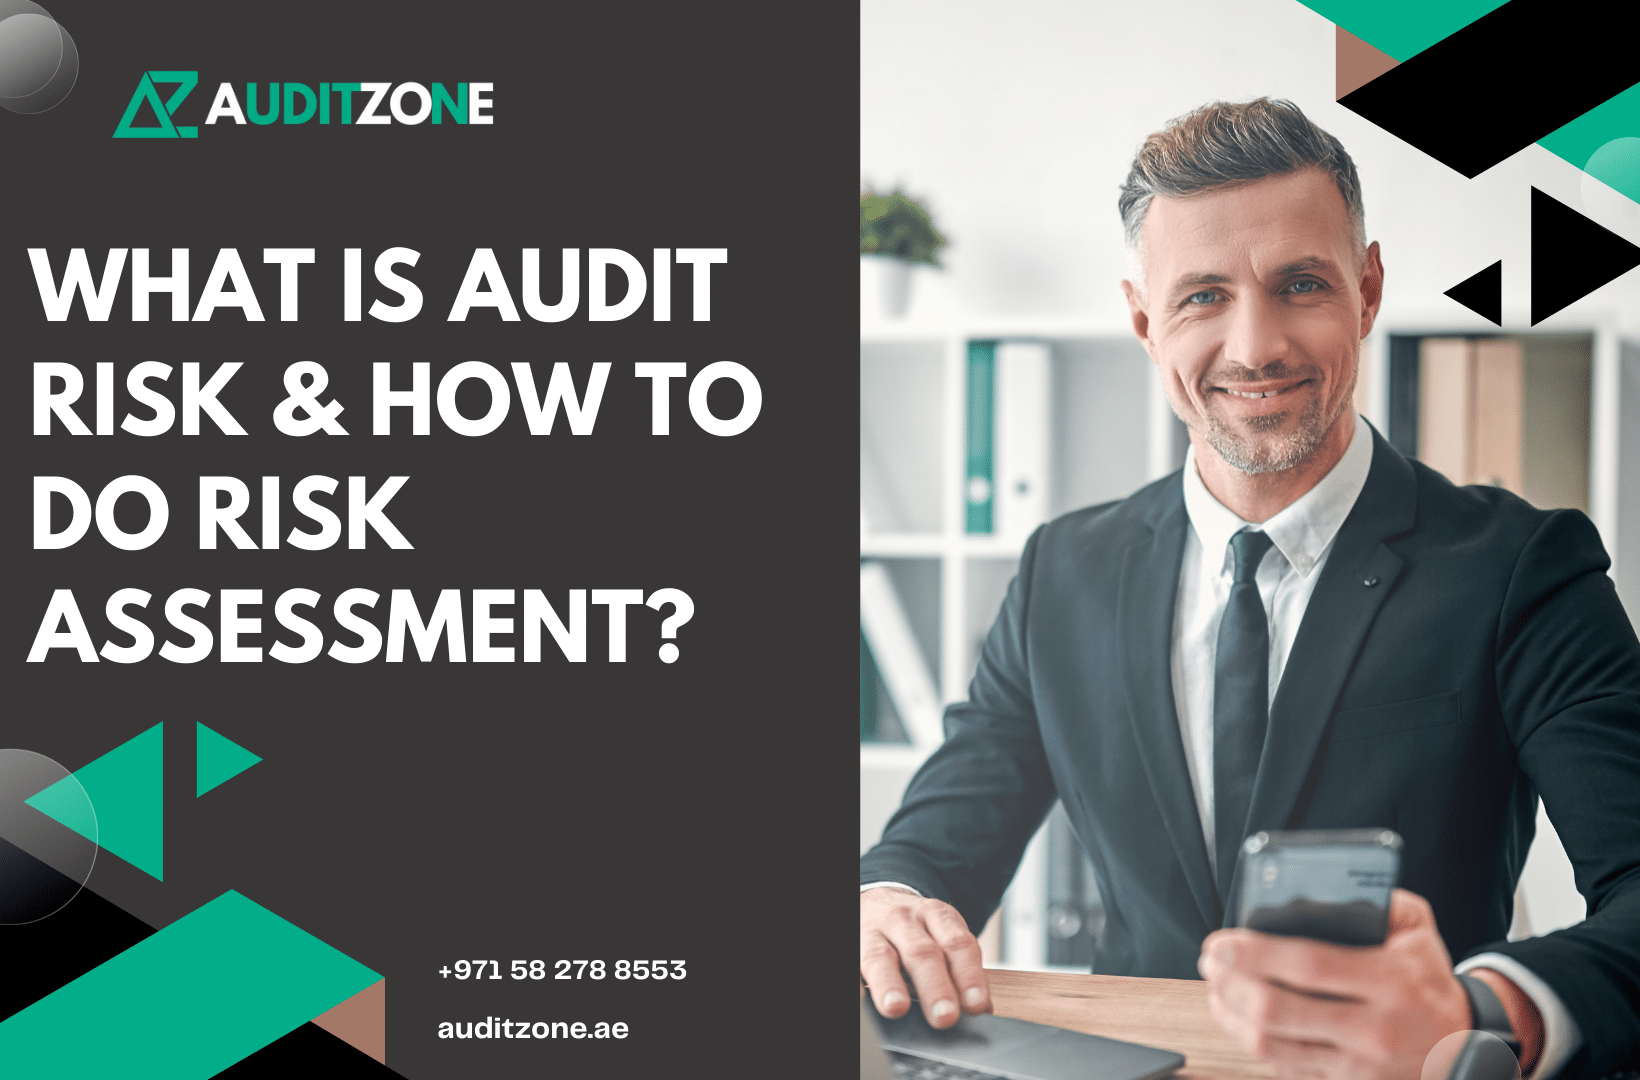 What is Audit Risk & How to do Risk Assessment